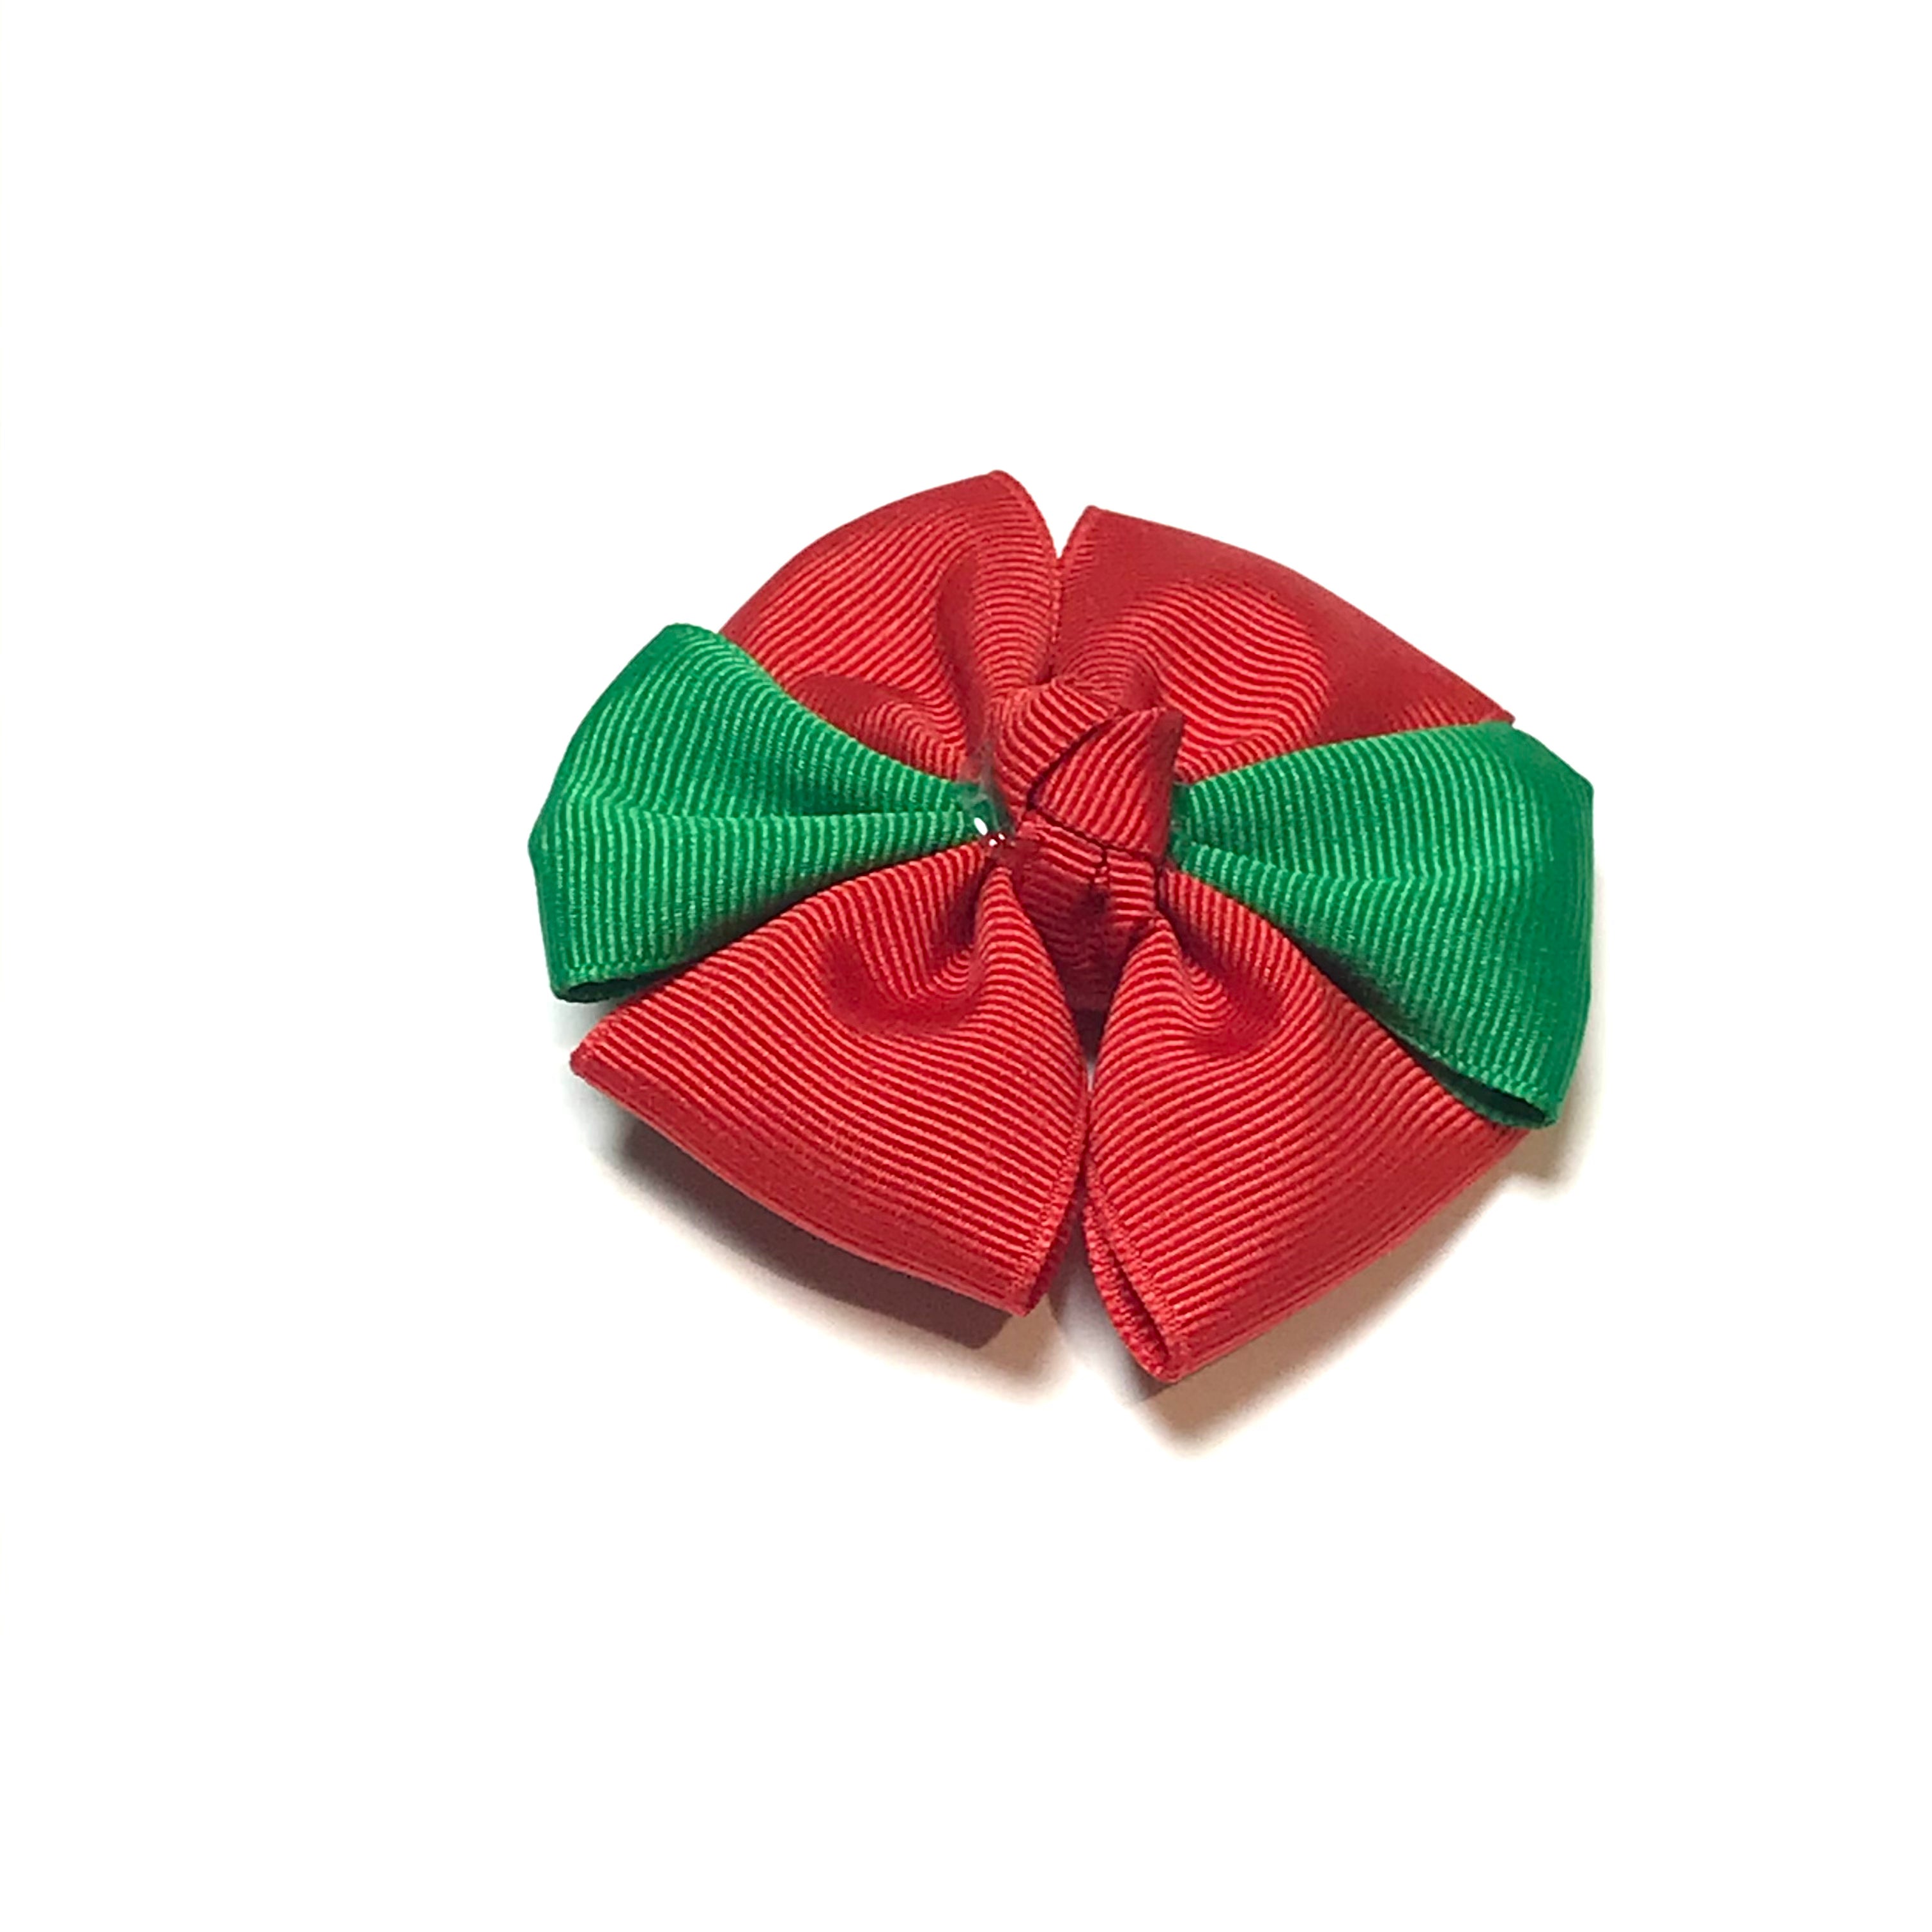 Dog Bow - Green/Red